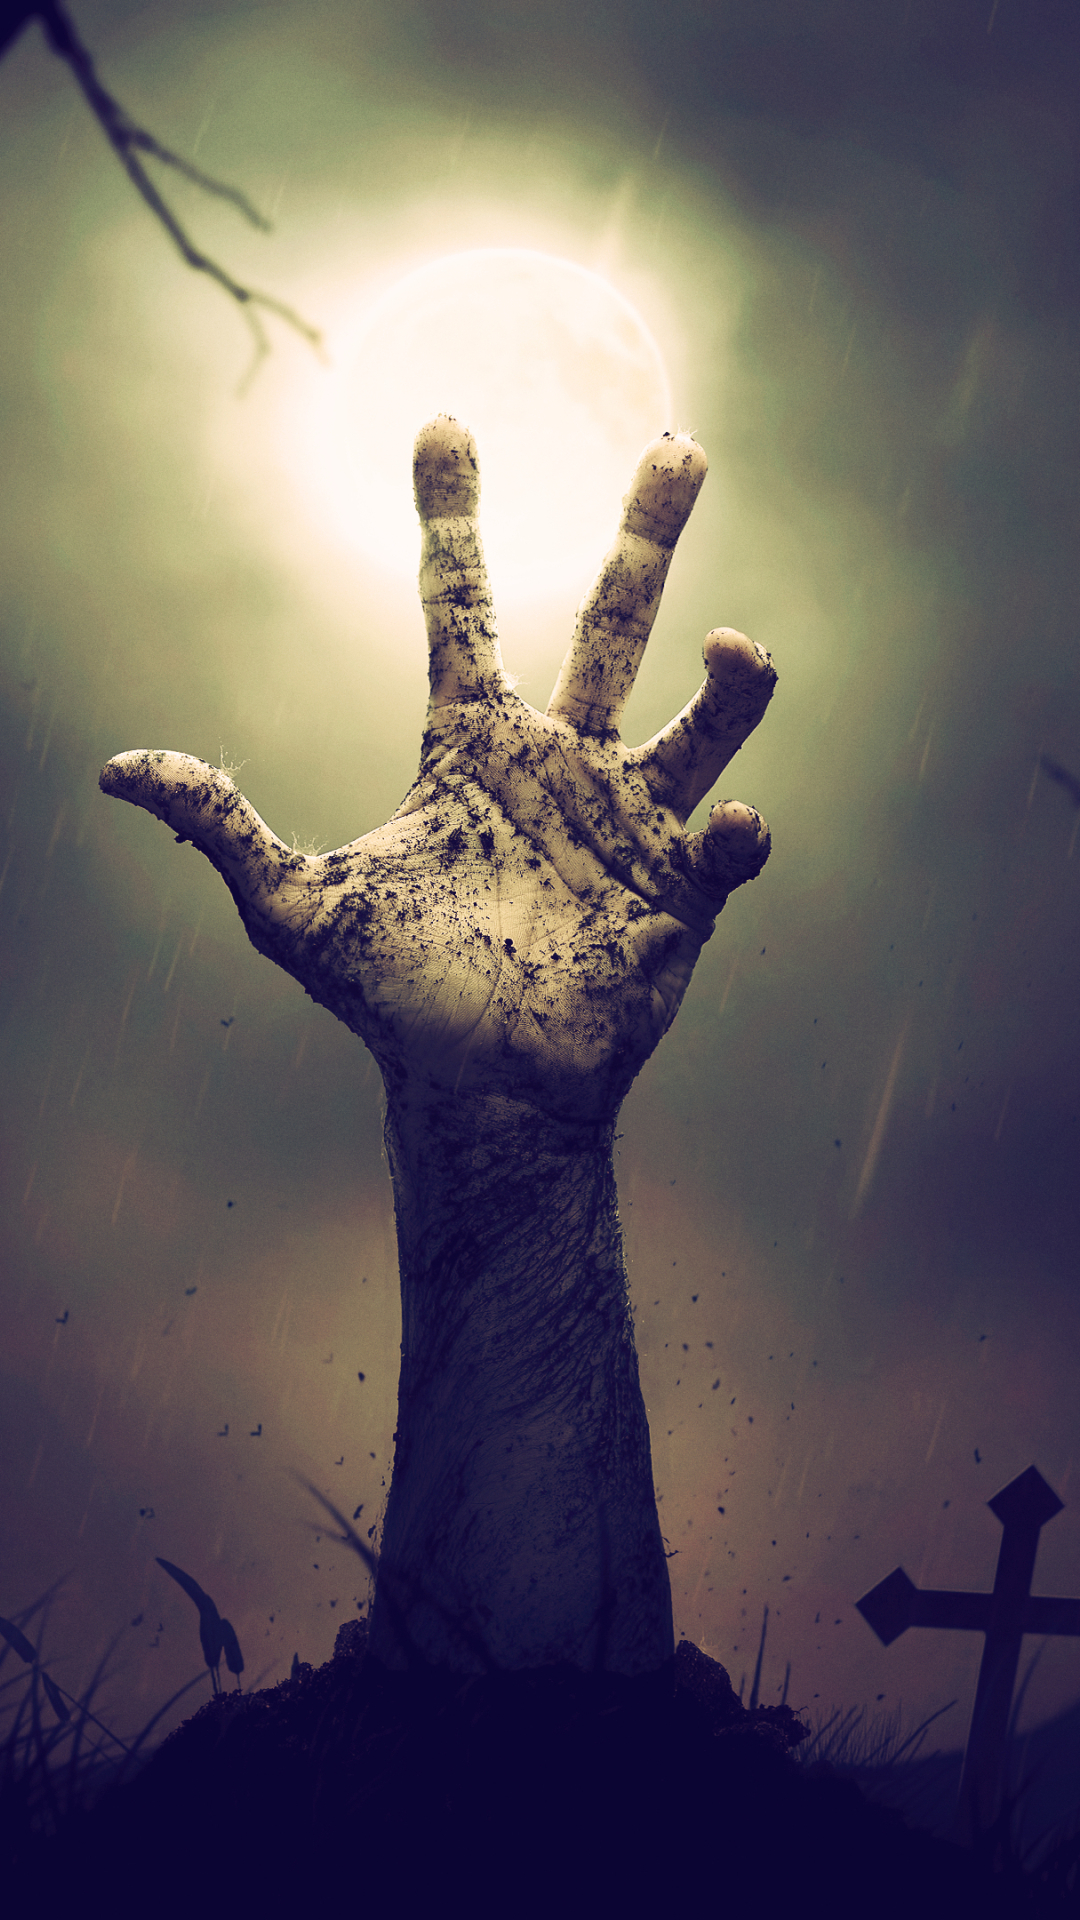 1080x1920 Zombie Hand From Cemetery Iphone 7, 6s, 6 Plus and Pixel XL ...